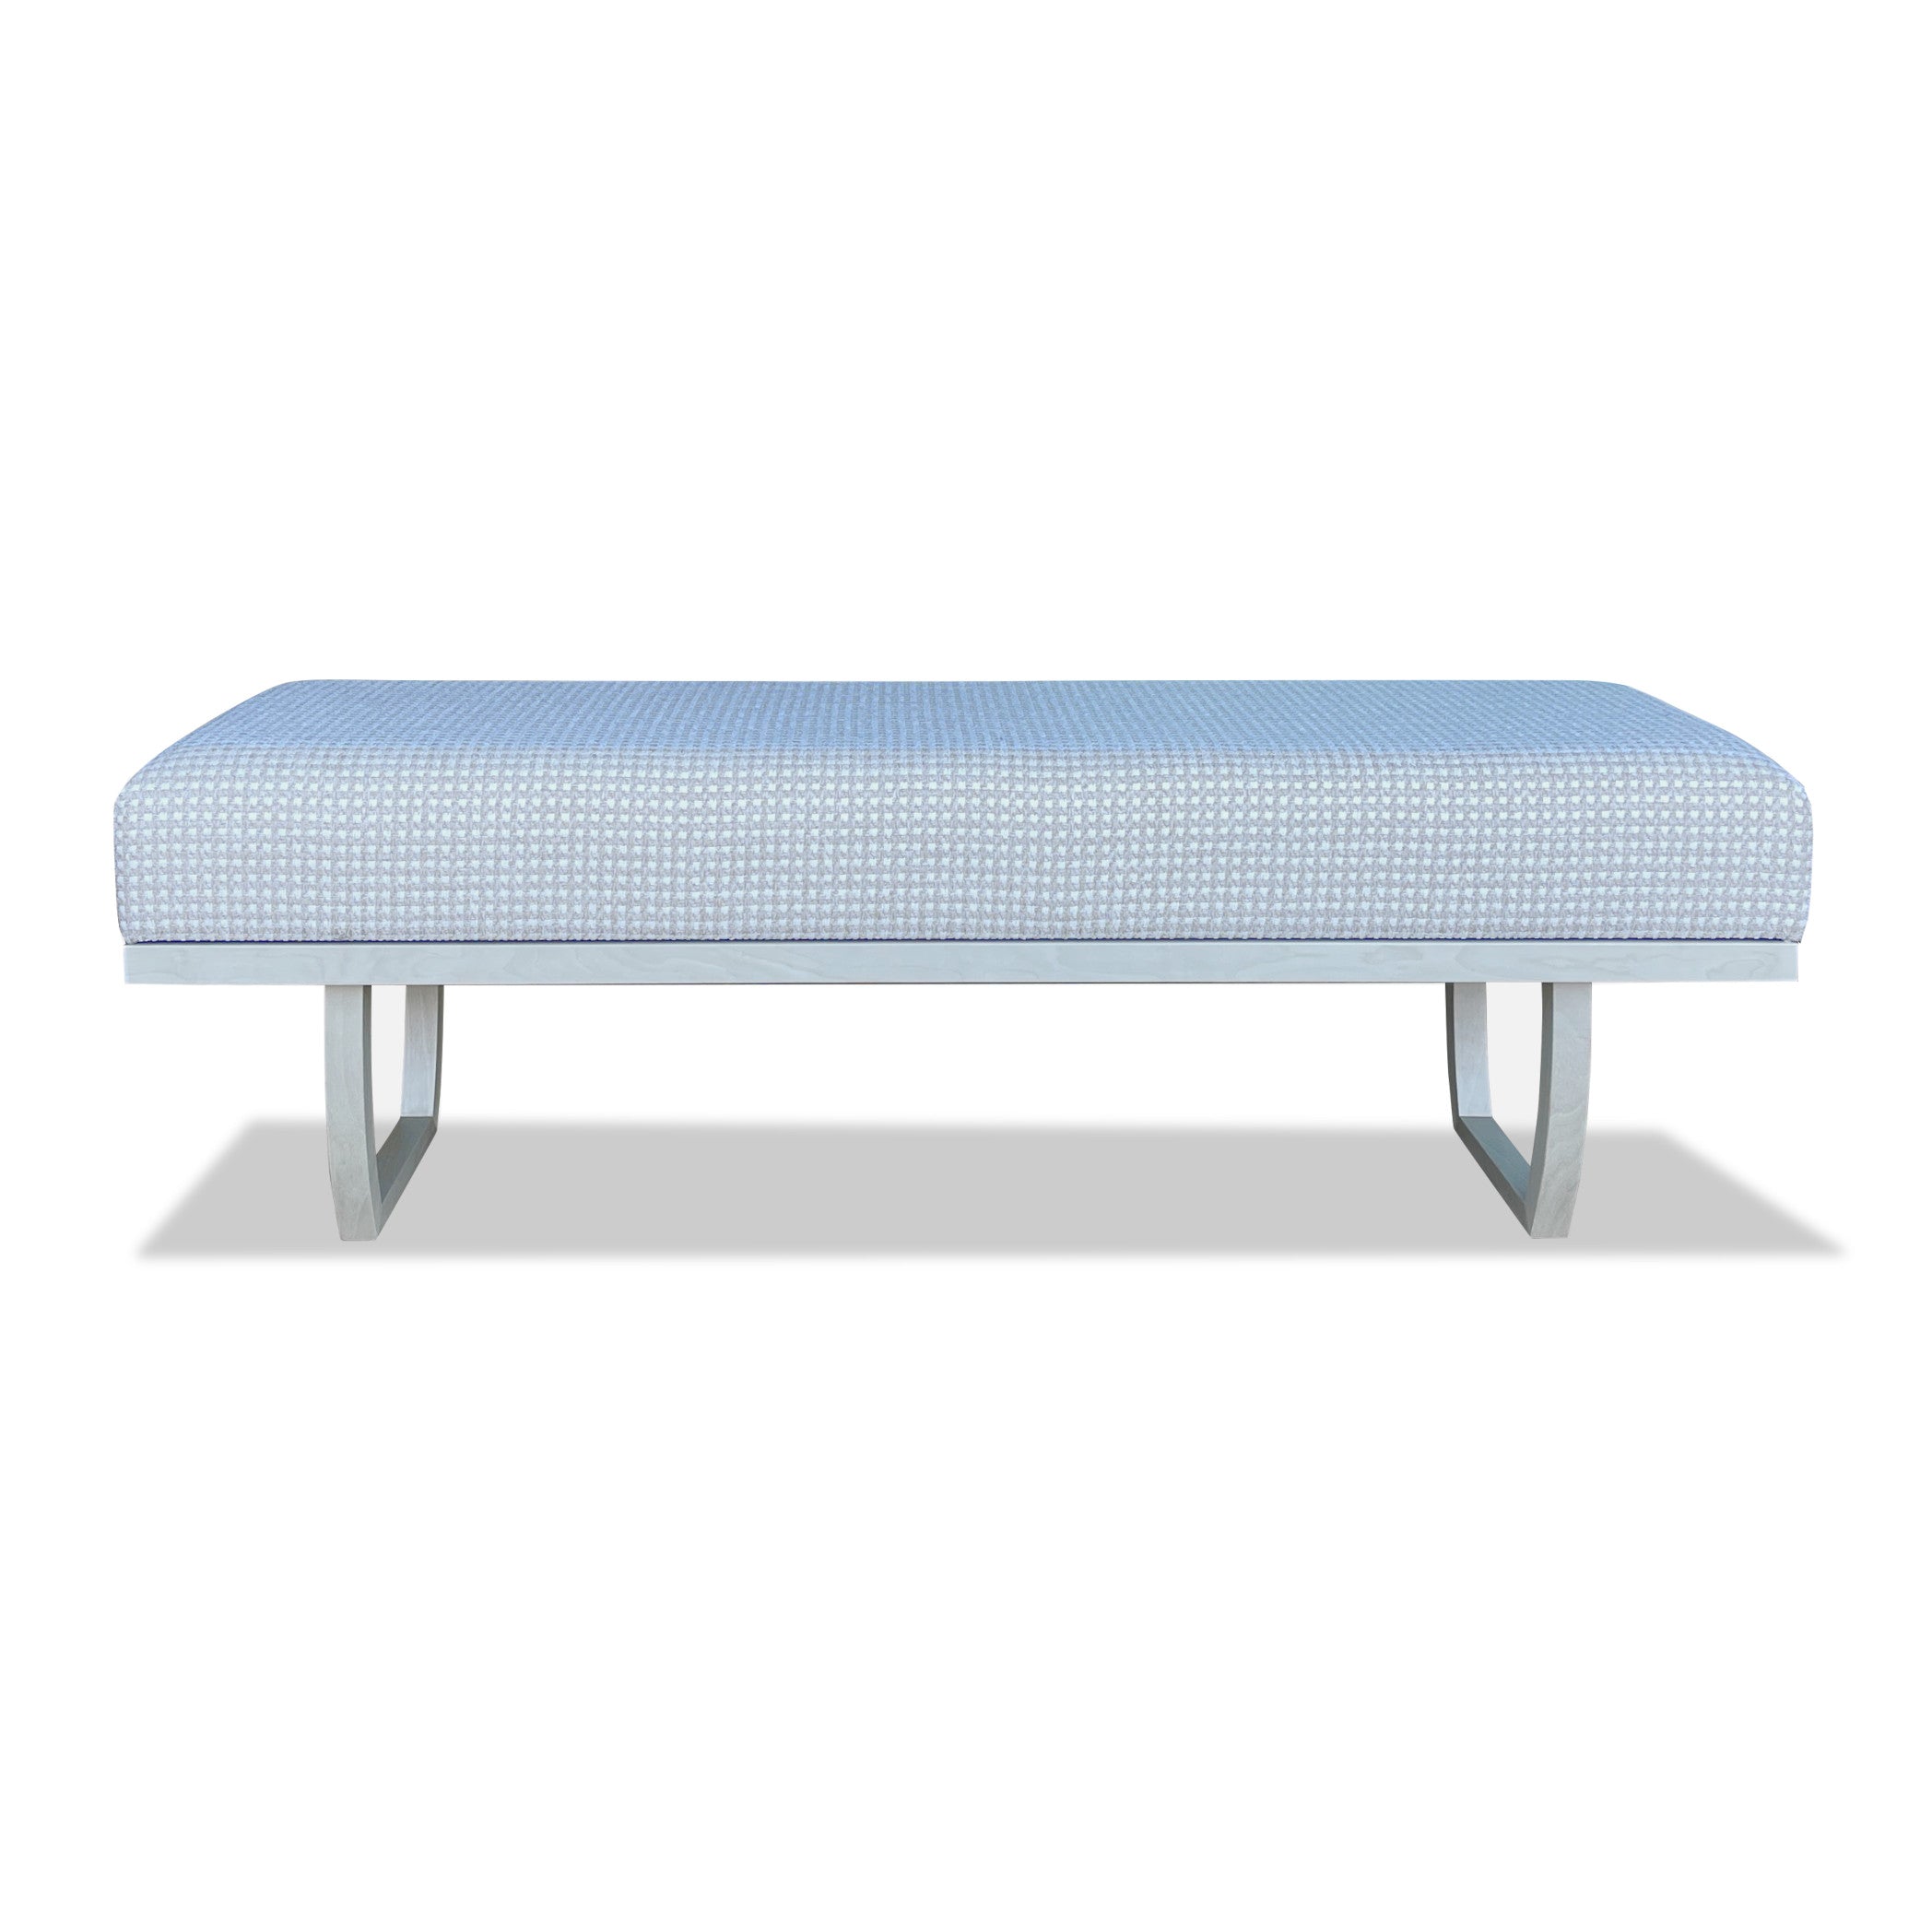 Pacific Bench - New!